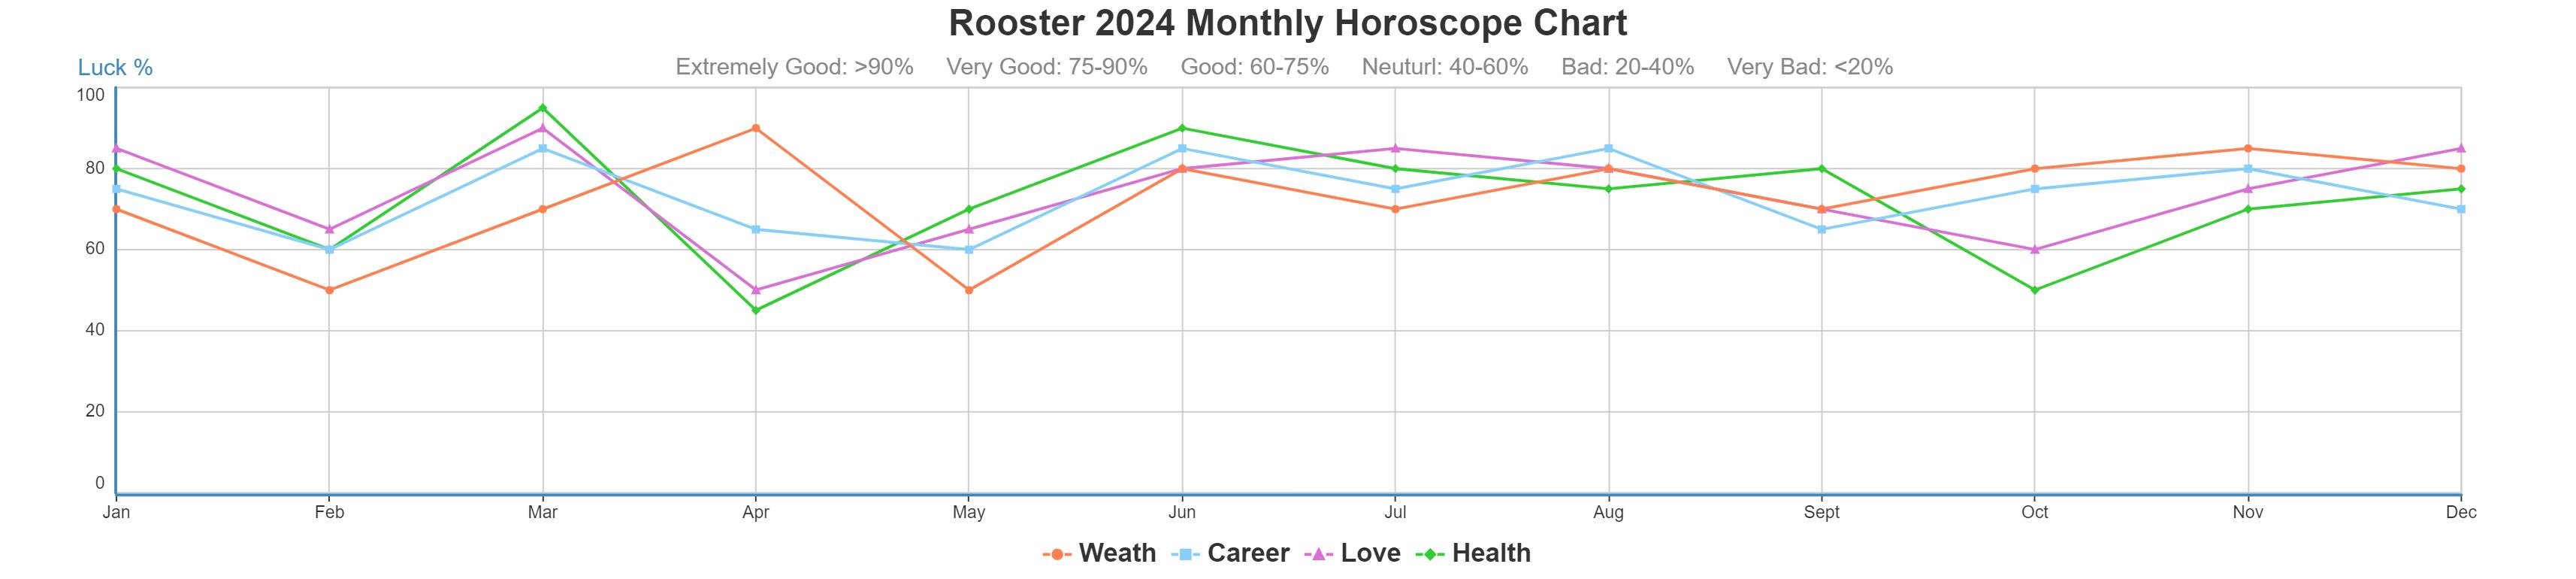 Rooster 2024 monthly horoscope